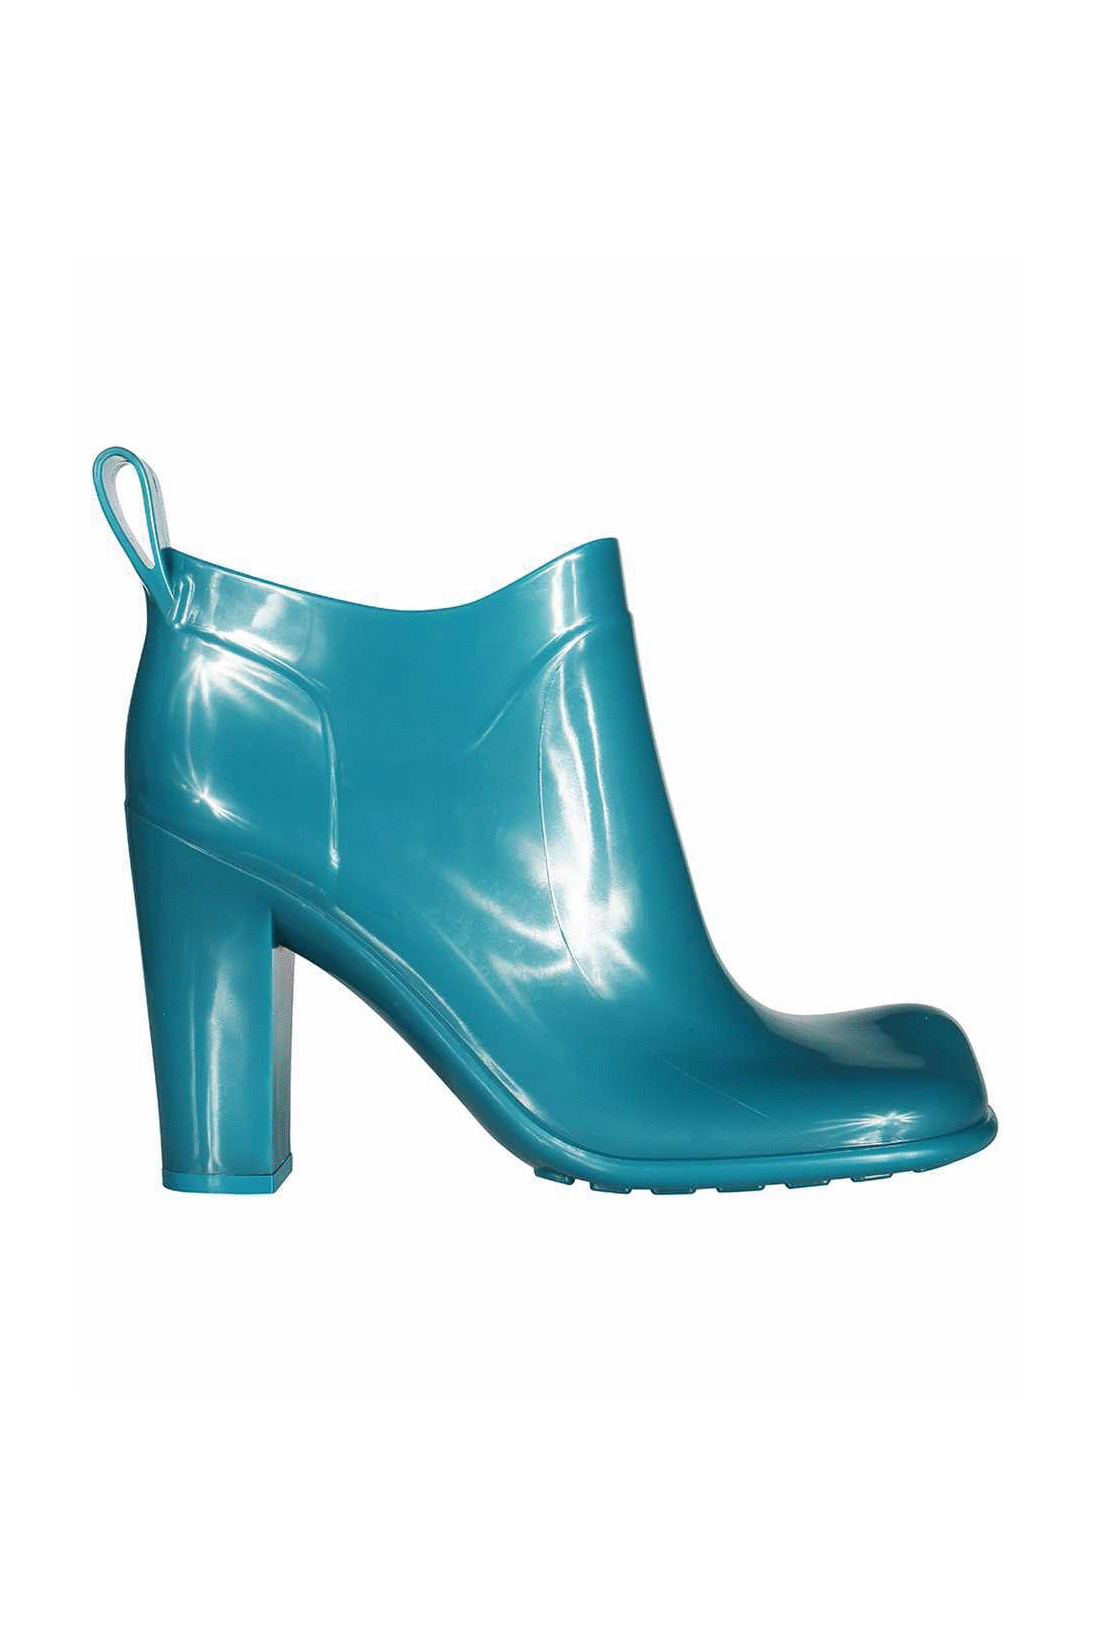 Shine rubber boots